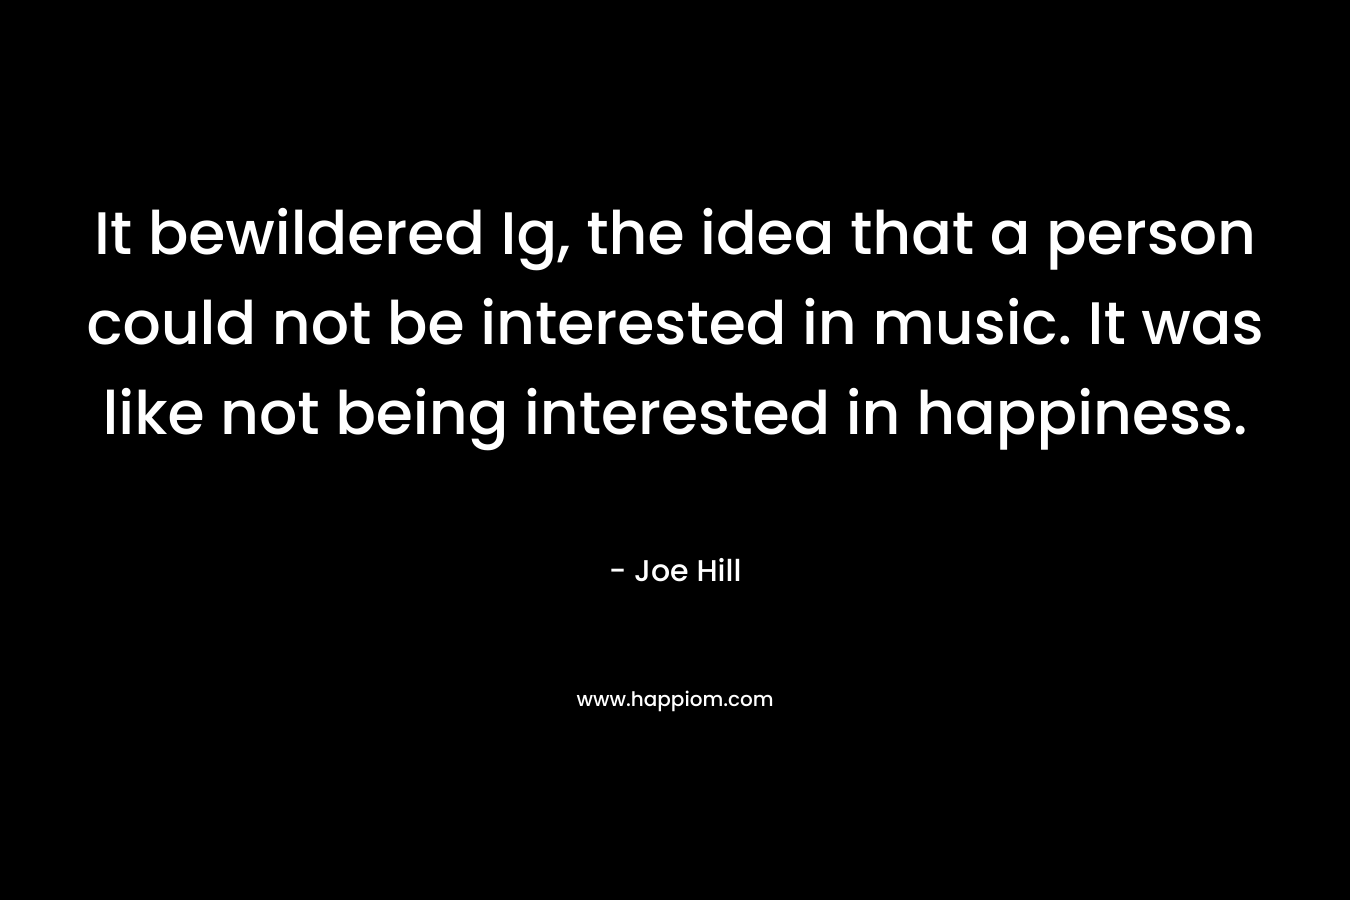 It bewildered Ig, the idea that a person could not be interested in music. It was like not being interested in happiness.